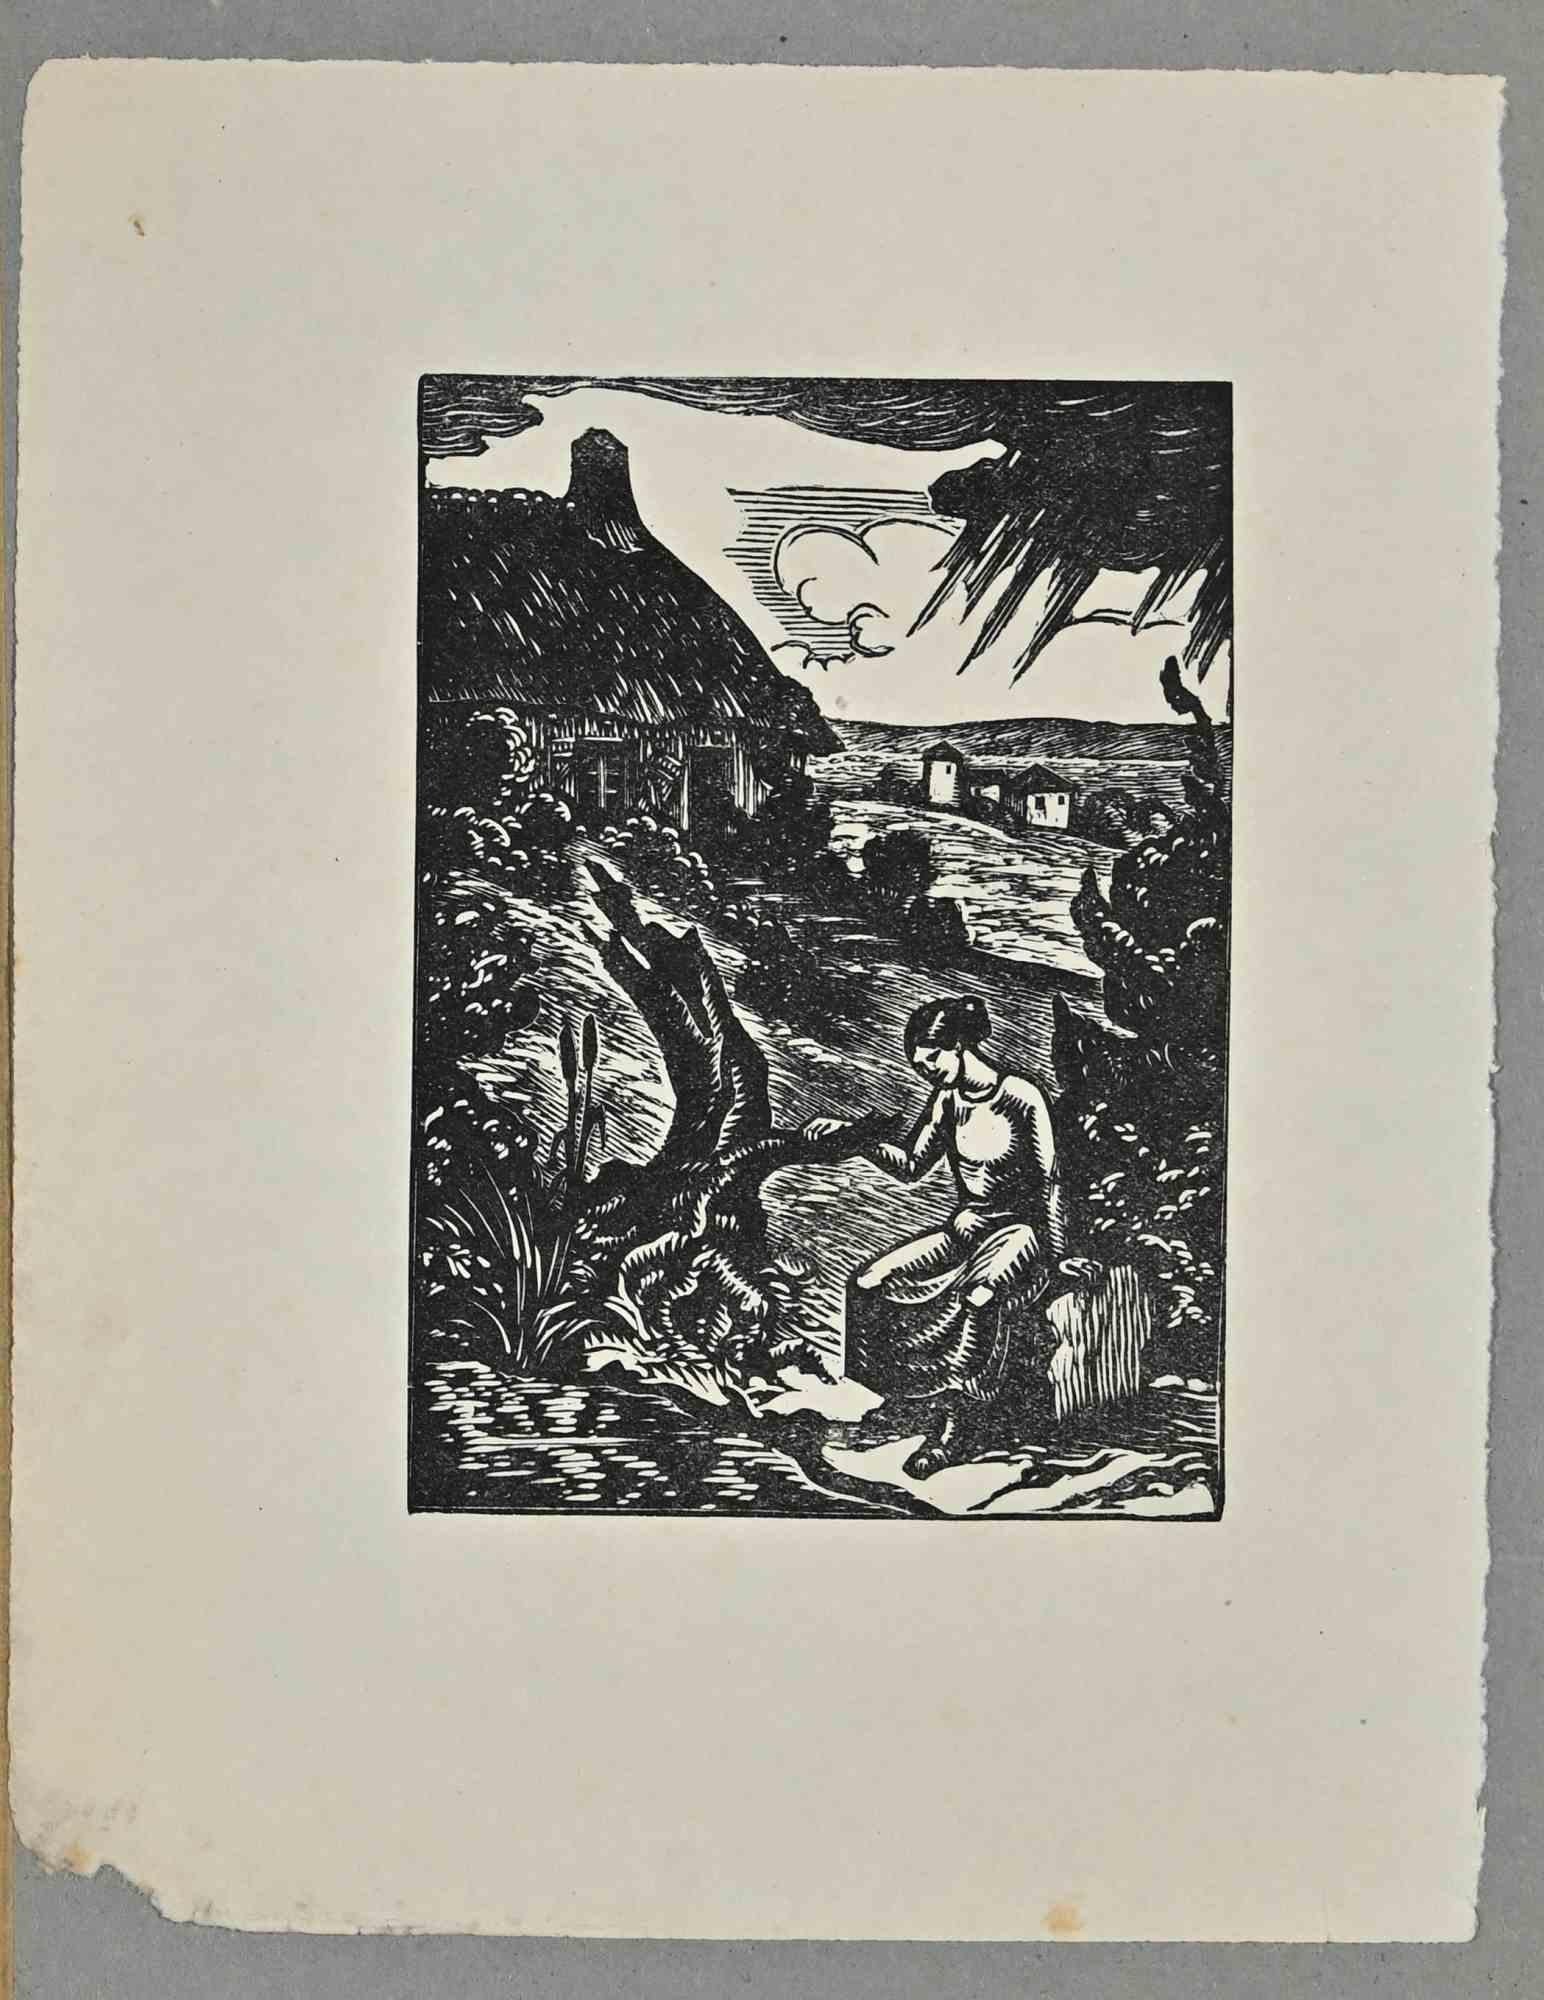 Breton Peasant is a woodcut print realized by Paul Emile Colin (1867-1949).

Good condition on a little paper, included a cream colored cardboard passpartout (30x24 cm).

No signature.

Paul-Émile Colin born onAugust 16, 1867 in Lunéville ( Meurthe